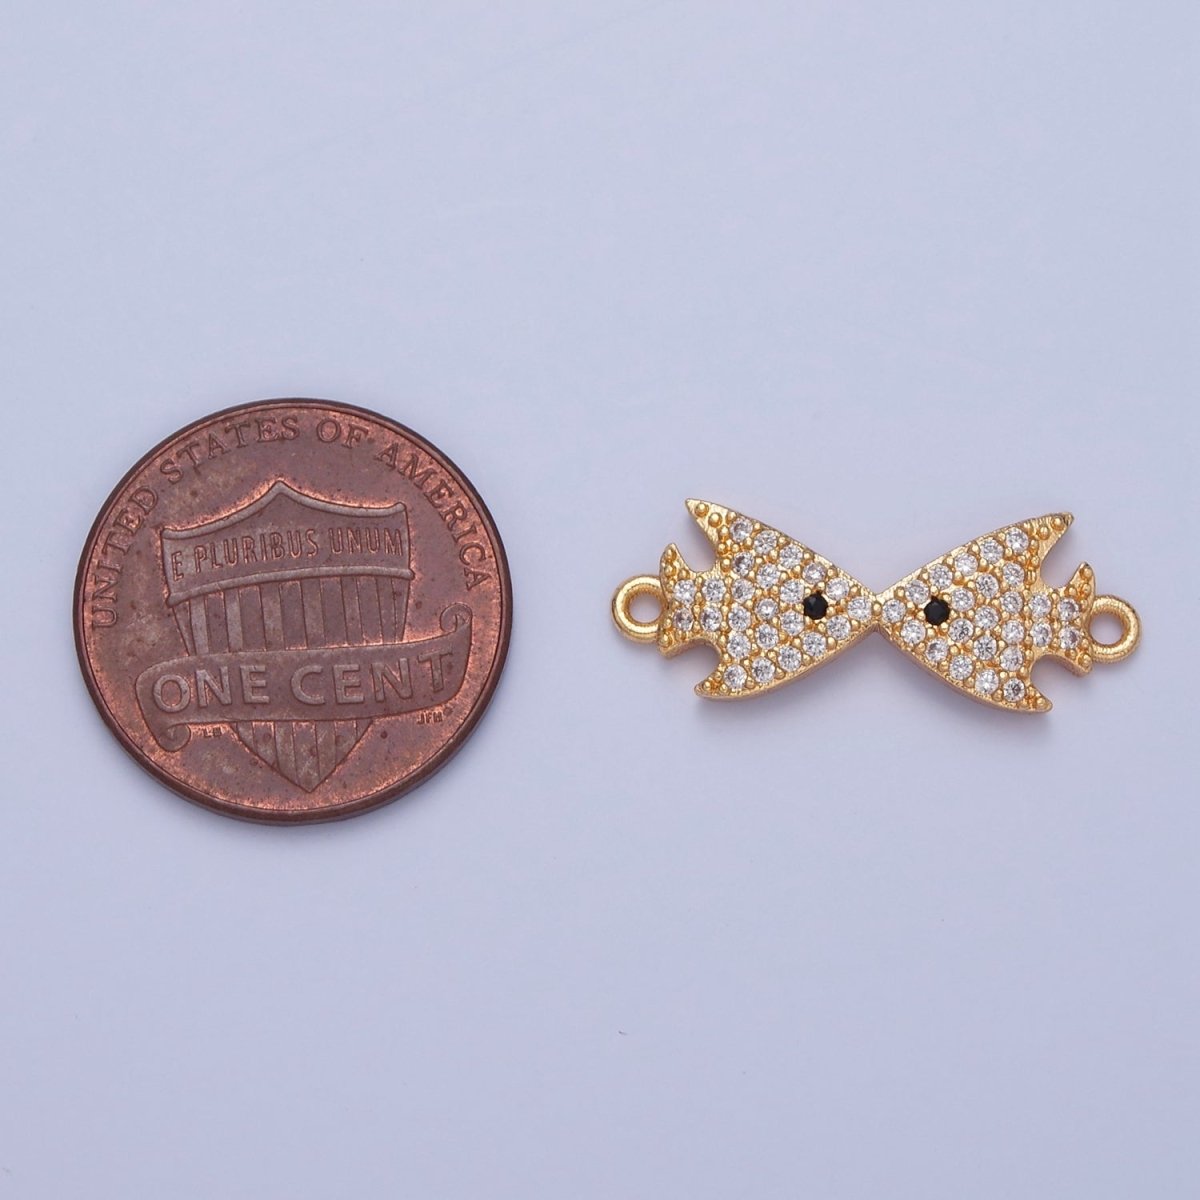 Dainty Kiss Fish CZ Gold Pave Charm Connector for Bracelet Necklace Supply F-321 - DLUXCA